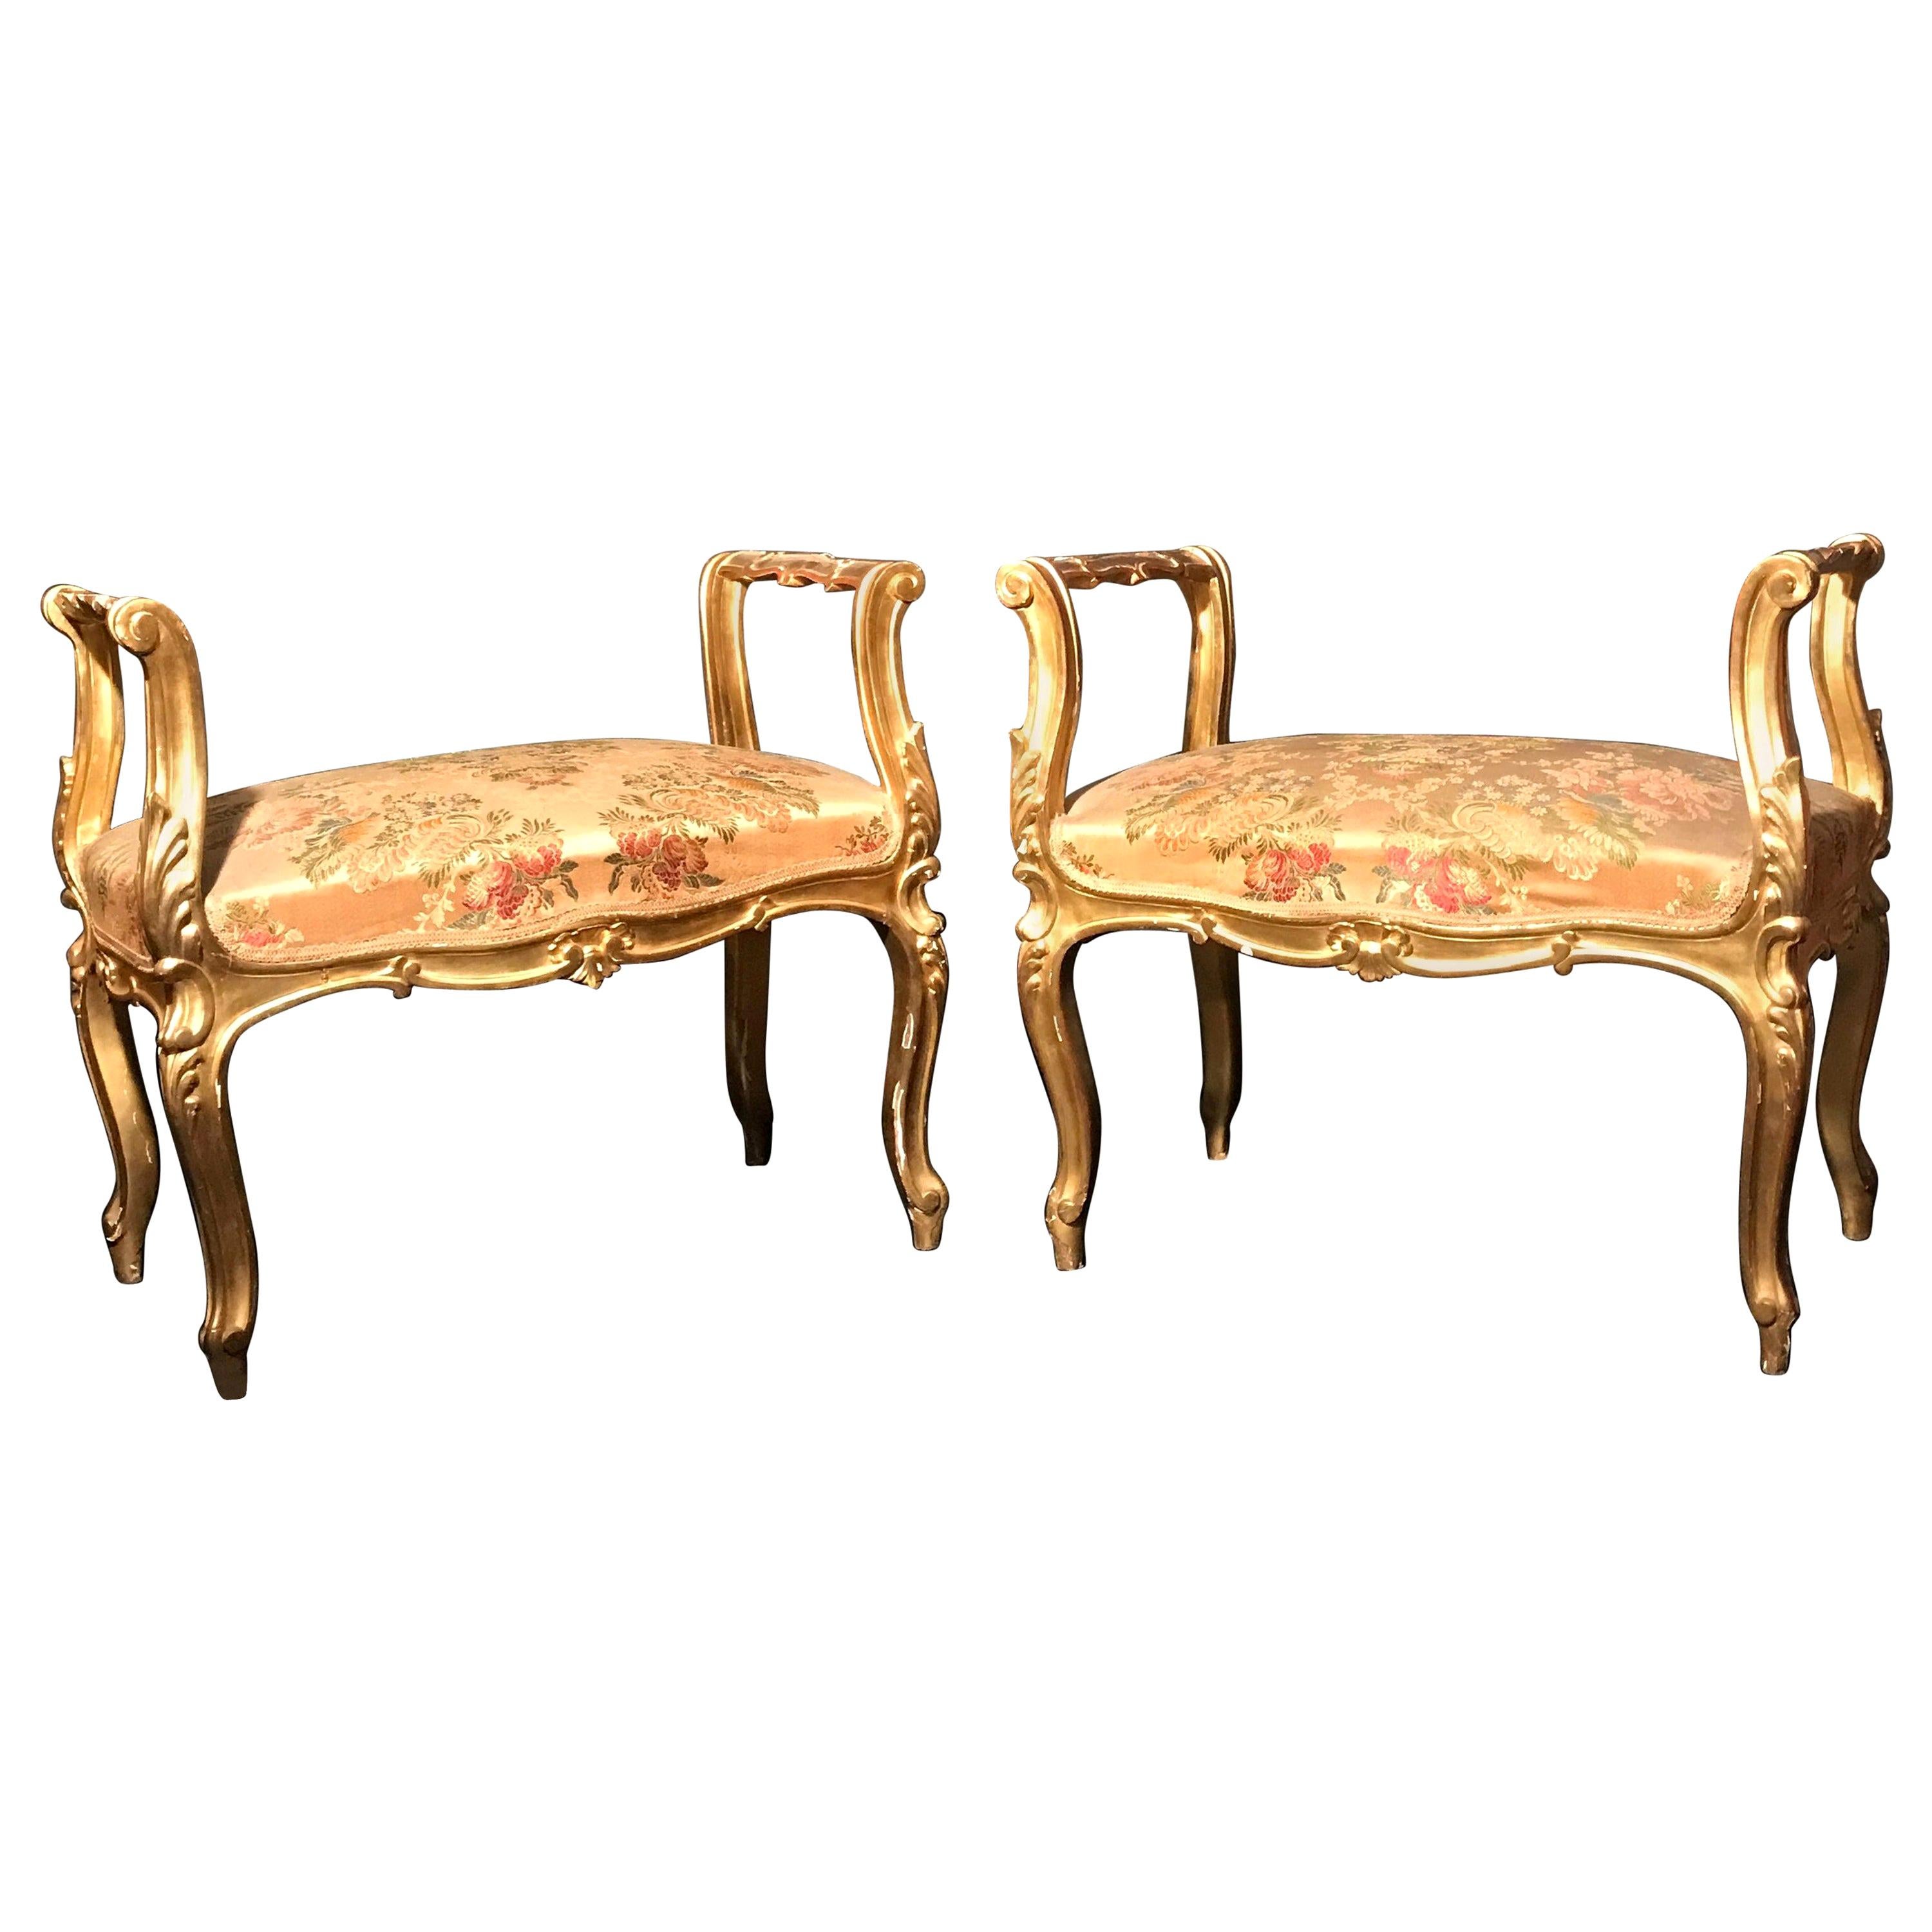 Pair of 19th Century Italian Gilt-Wood  Window Benches or Settees